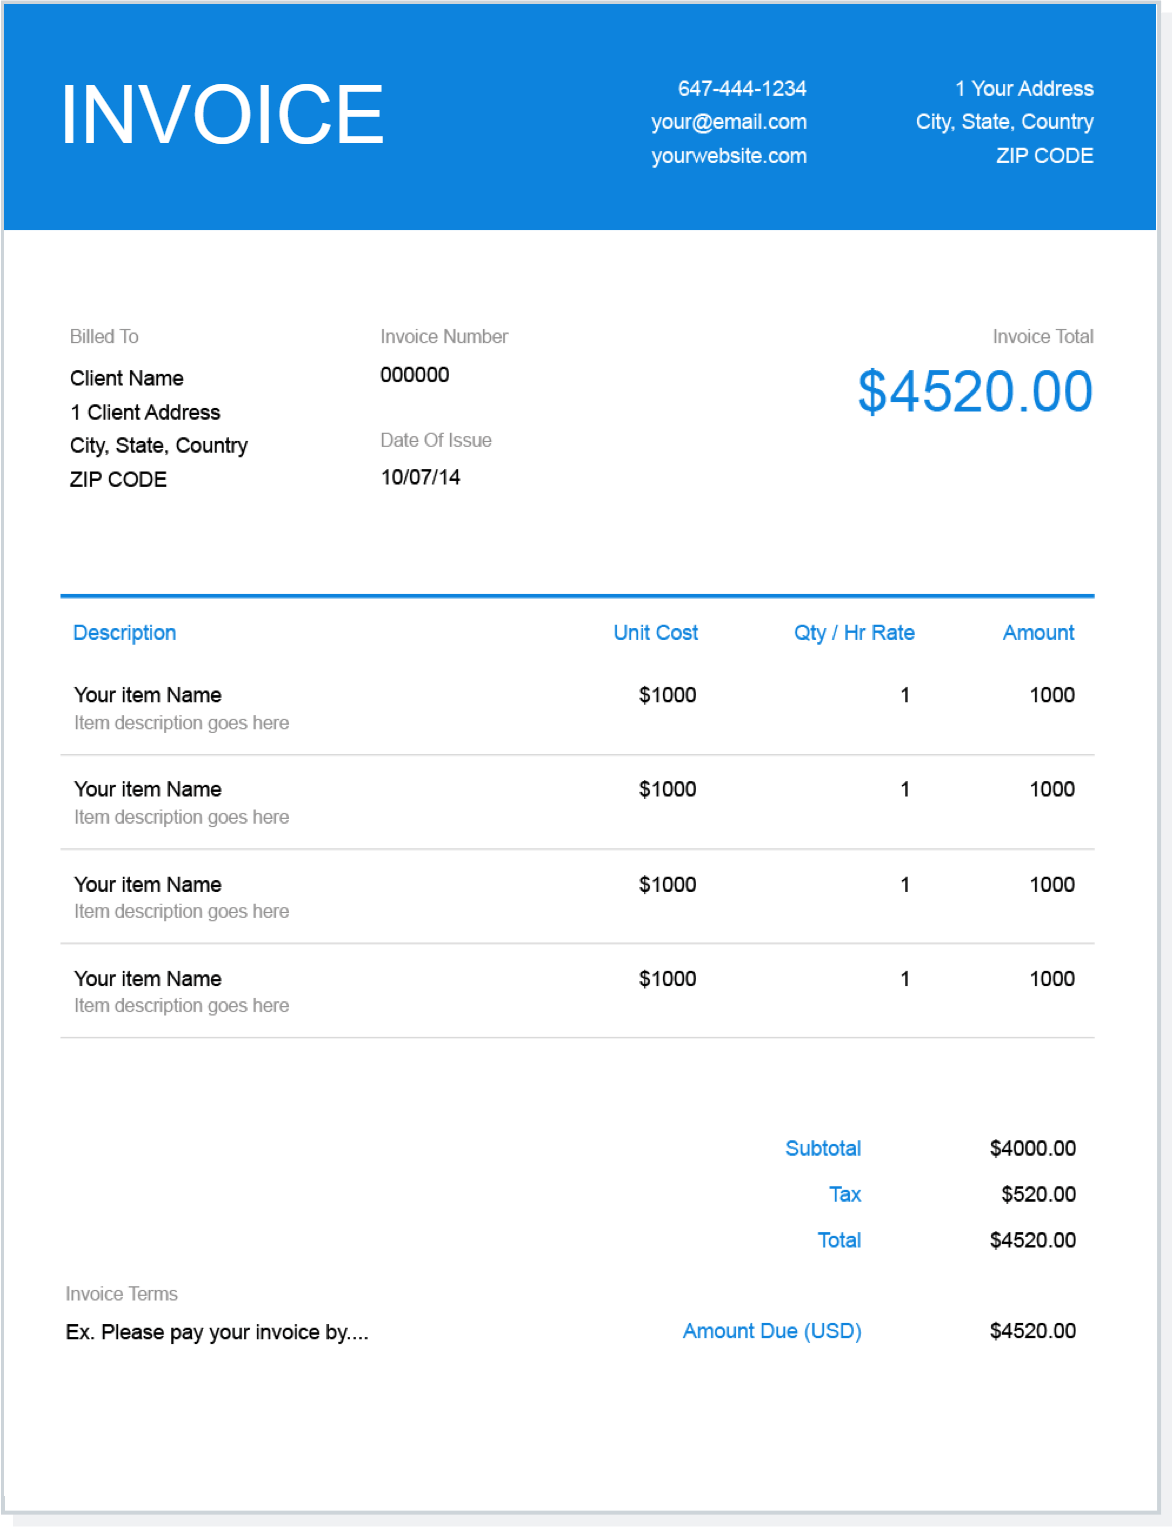 invoice-template-blue.png